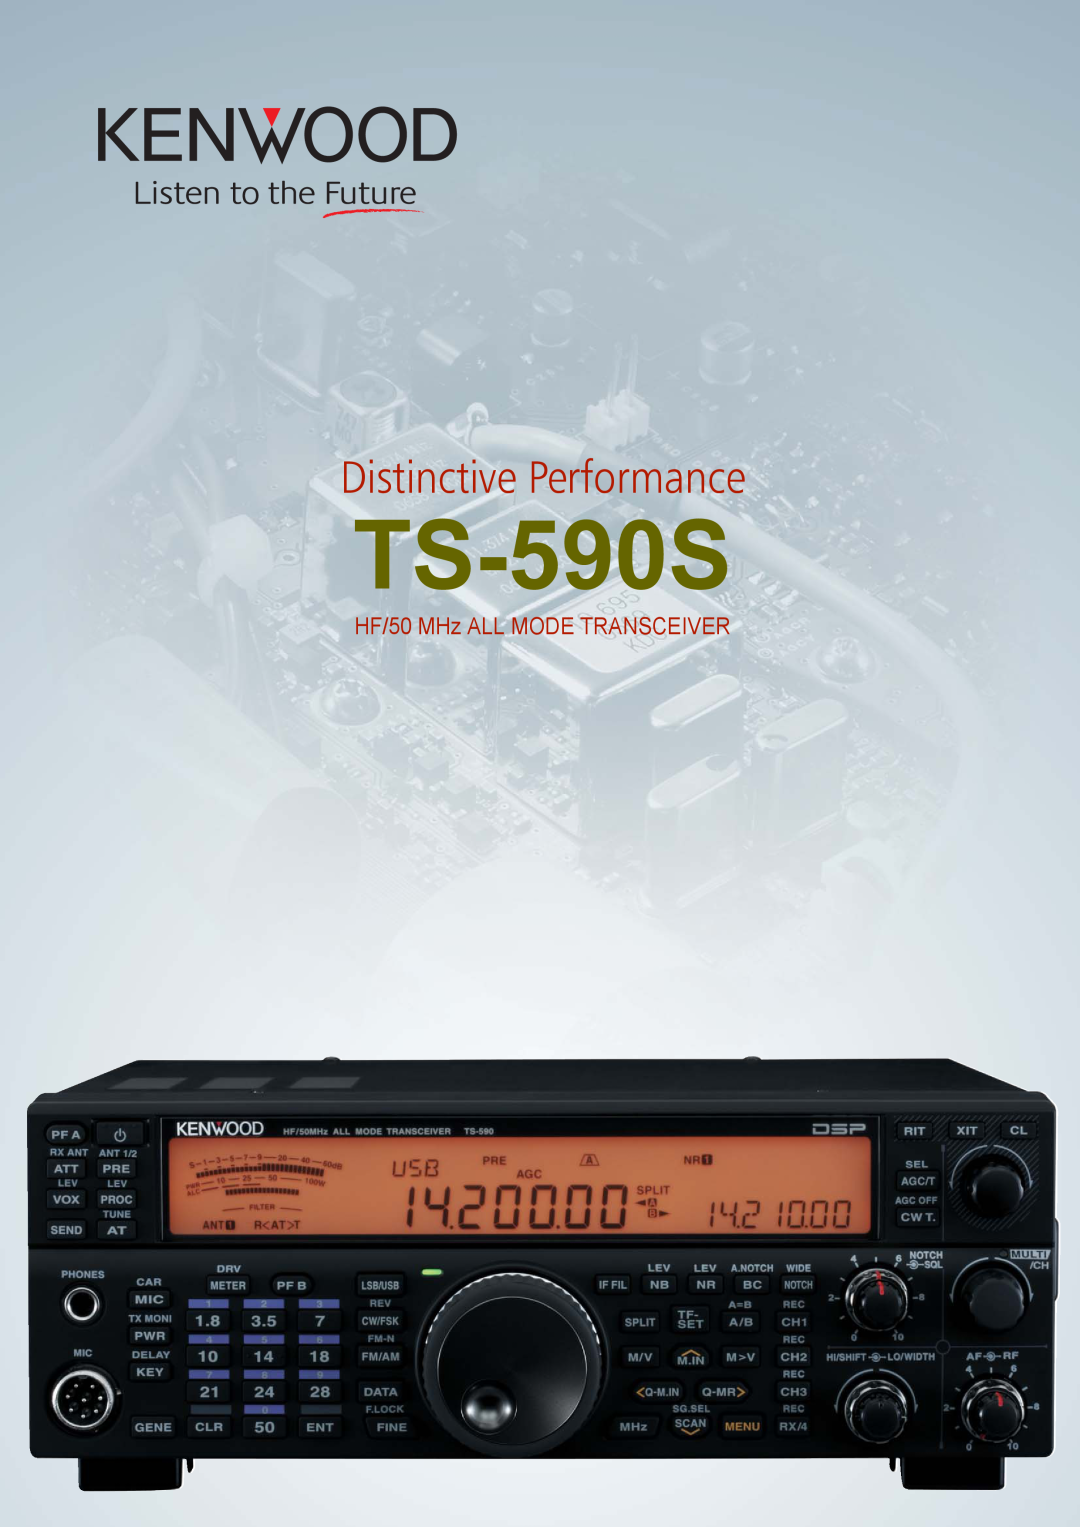 Kenwood TS-590S instruction manual Instruction Manual, HF/ 50 MHz ALL MODE TRANSCEIVER, ISO3166 